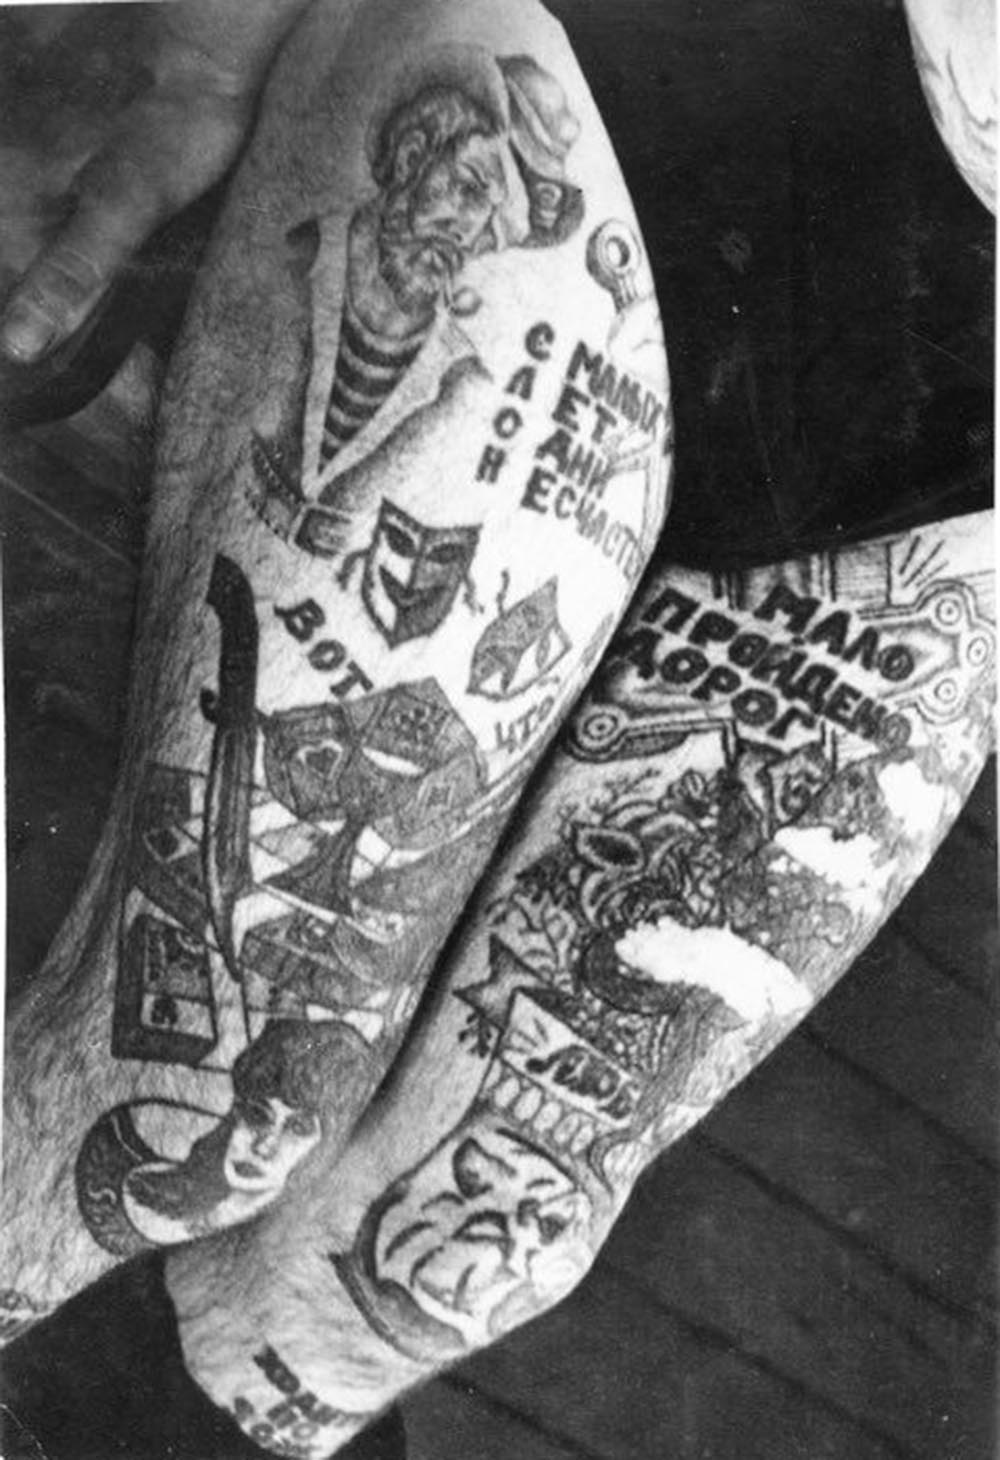 On his right leg is the acronym ‘SLON: S malih Let Odni Neschastya,’ which translates to 'Only Misfortunes from an Early Age.' Text under this reads ‘Here is what [is killing us].' The dagger, cards and money are a variation of the popular tattoo ‘These are the things that destroy us.' Text at the top of the left leg reads ‘Few roads have been walked.' Text by the knee reads ‘Love.' Text on the shin reads ‘It [the leg] walks around the zone.' The theatre masks on the right leg represent happiness (before prison) and sadness (after prison).